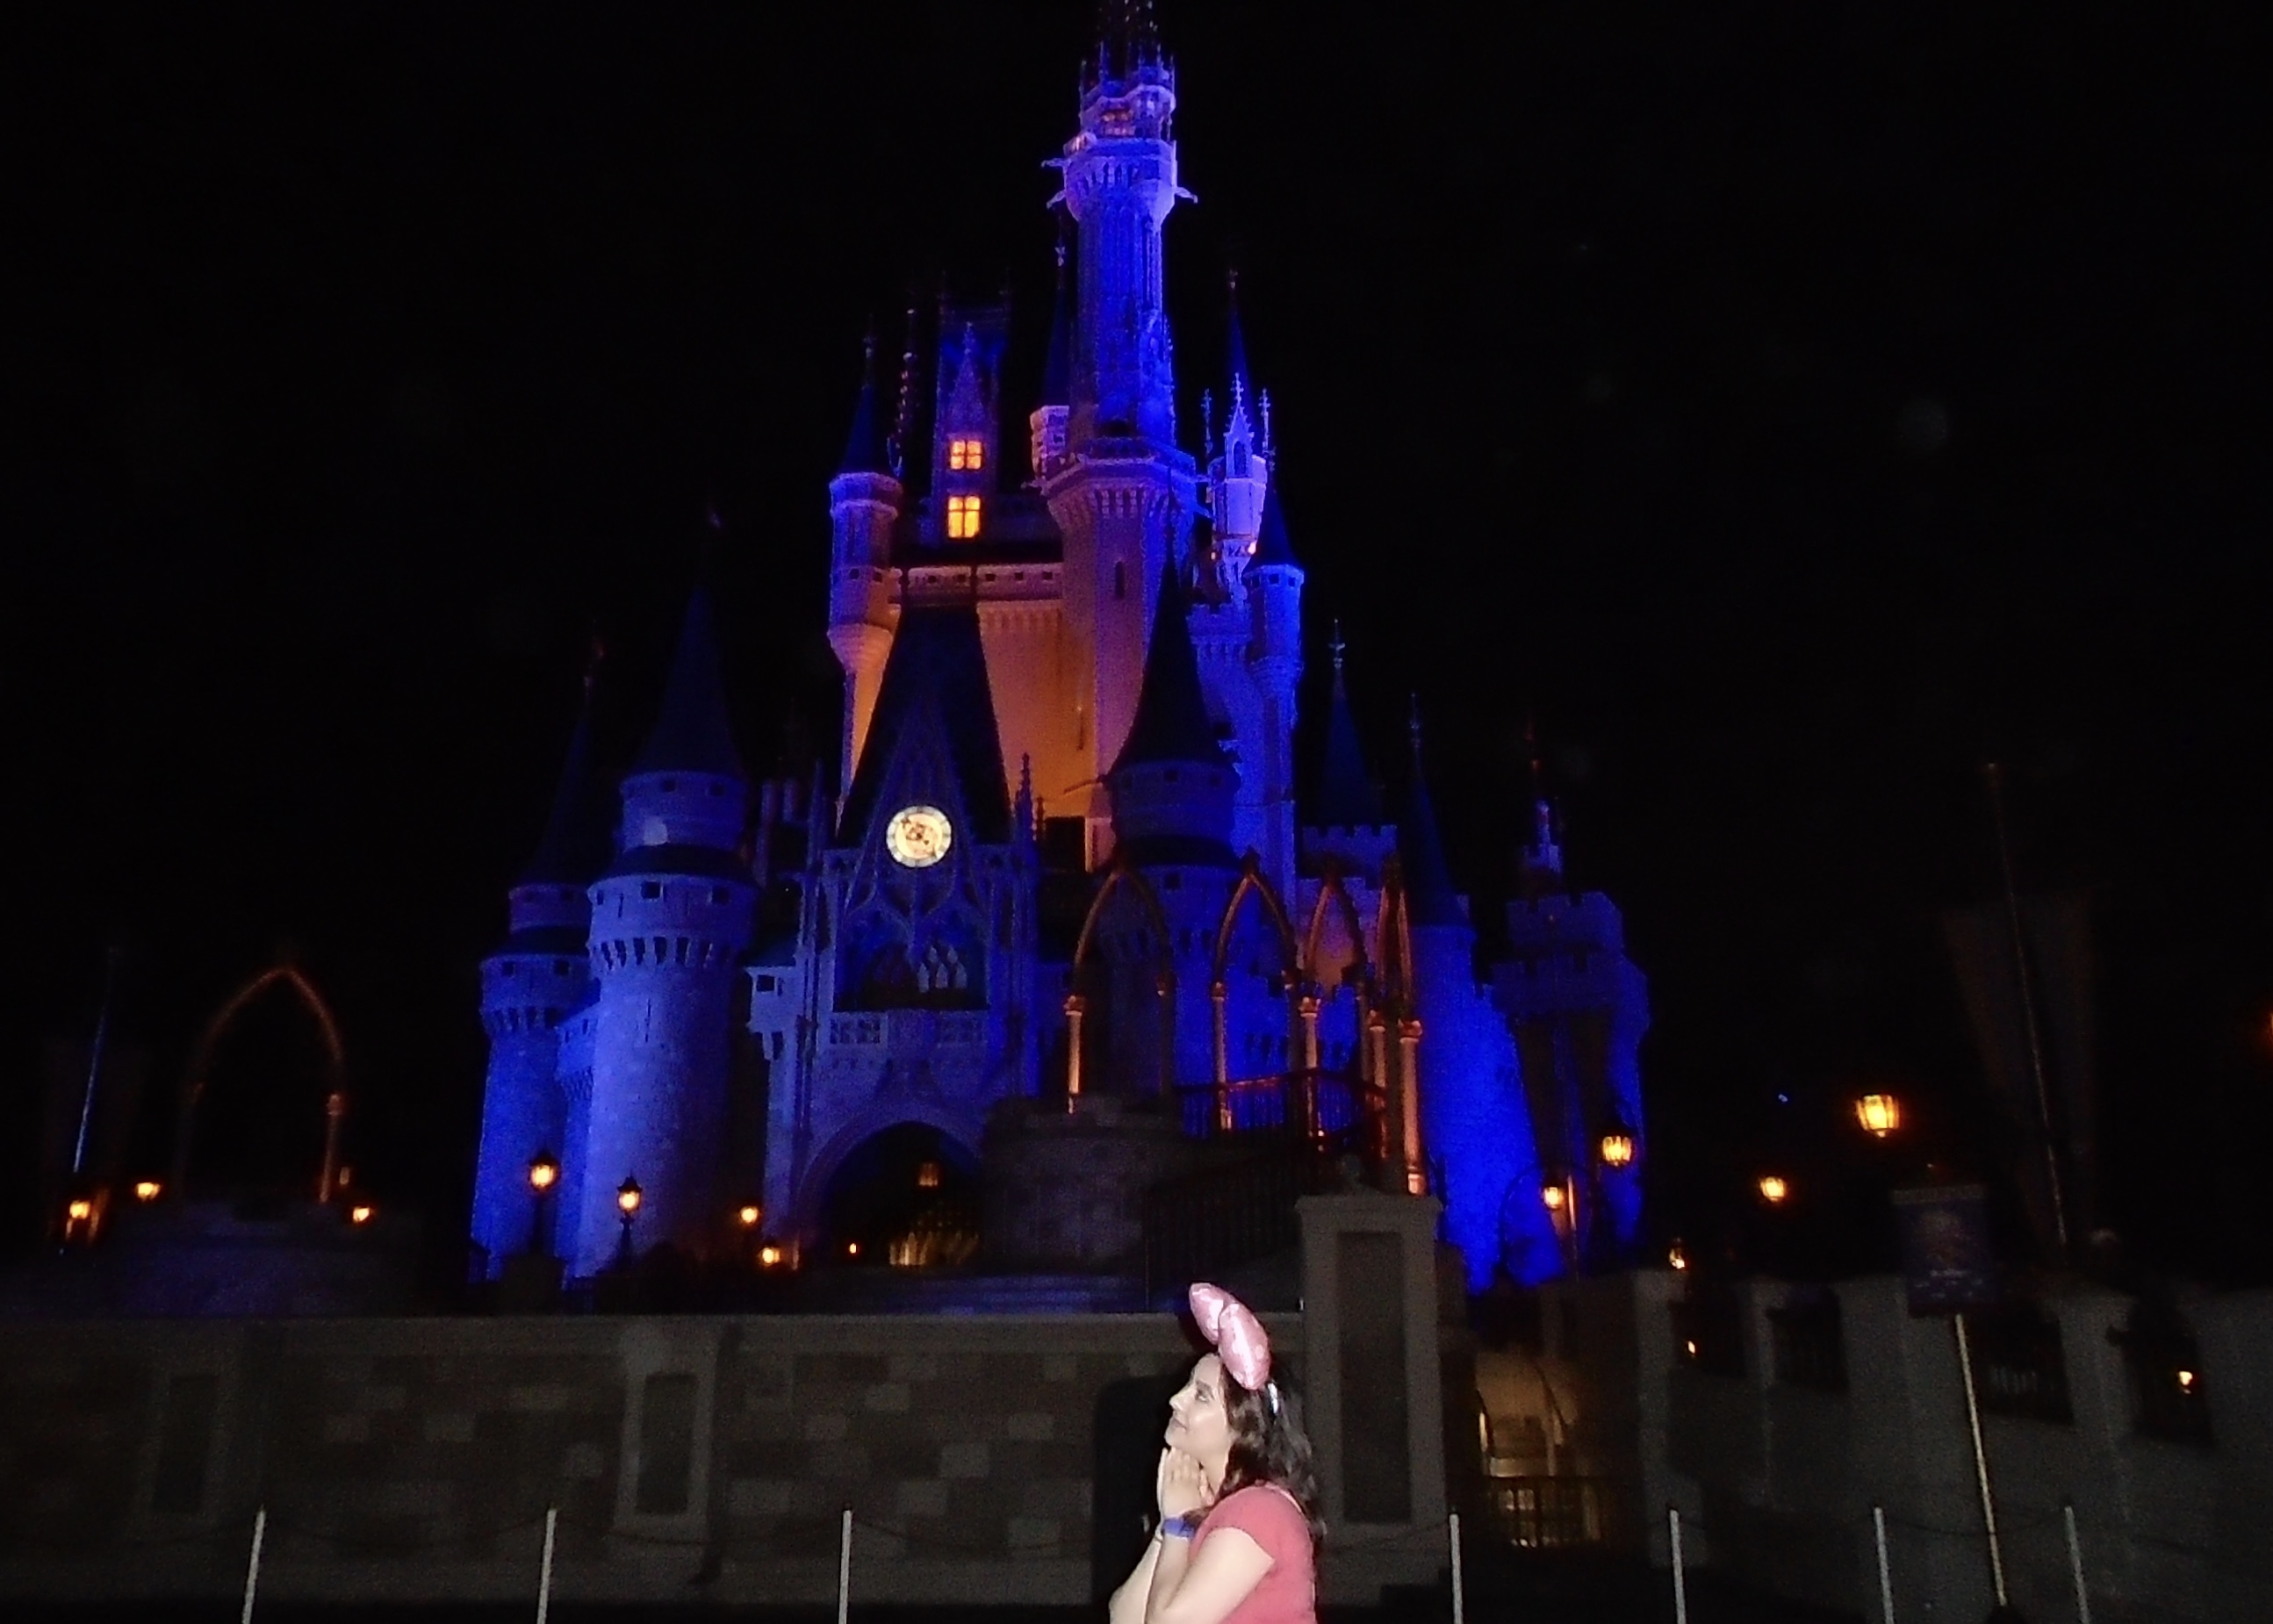 Picture in front of Cinderella's castle at Magic Kingdom. Image courtesy of The Signal Reporter Crystal Sauceda.